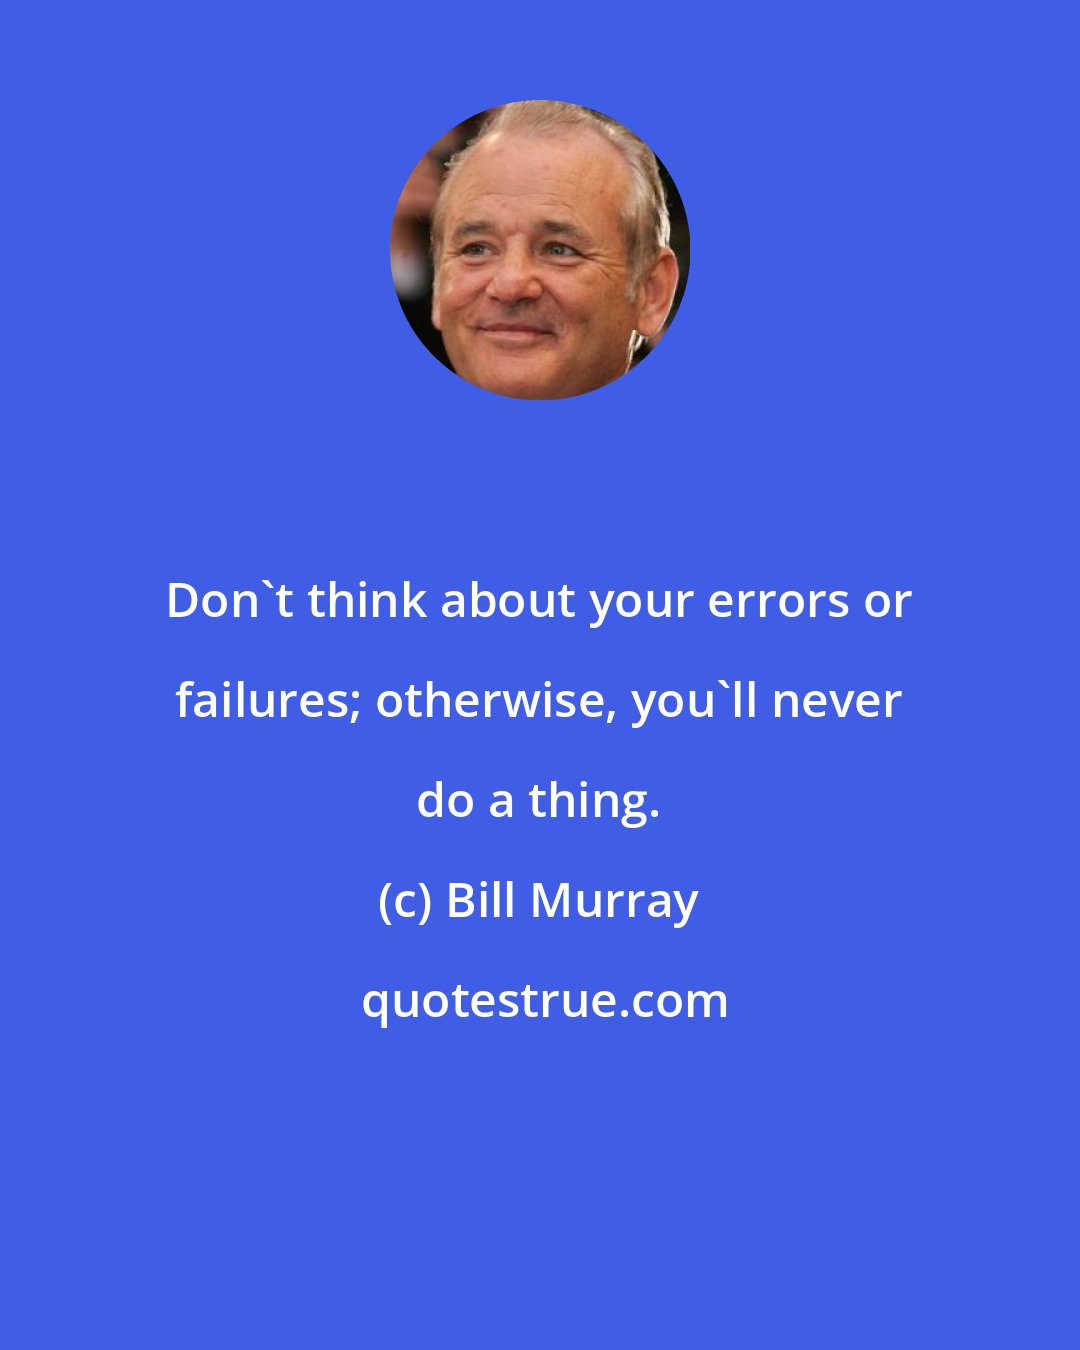 Bill Murray: Don't think about your errors or failures; otherwise, you'll never do a thing.